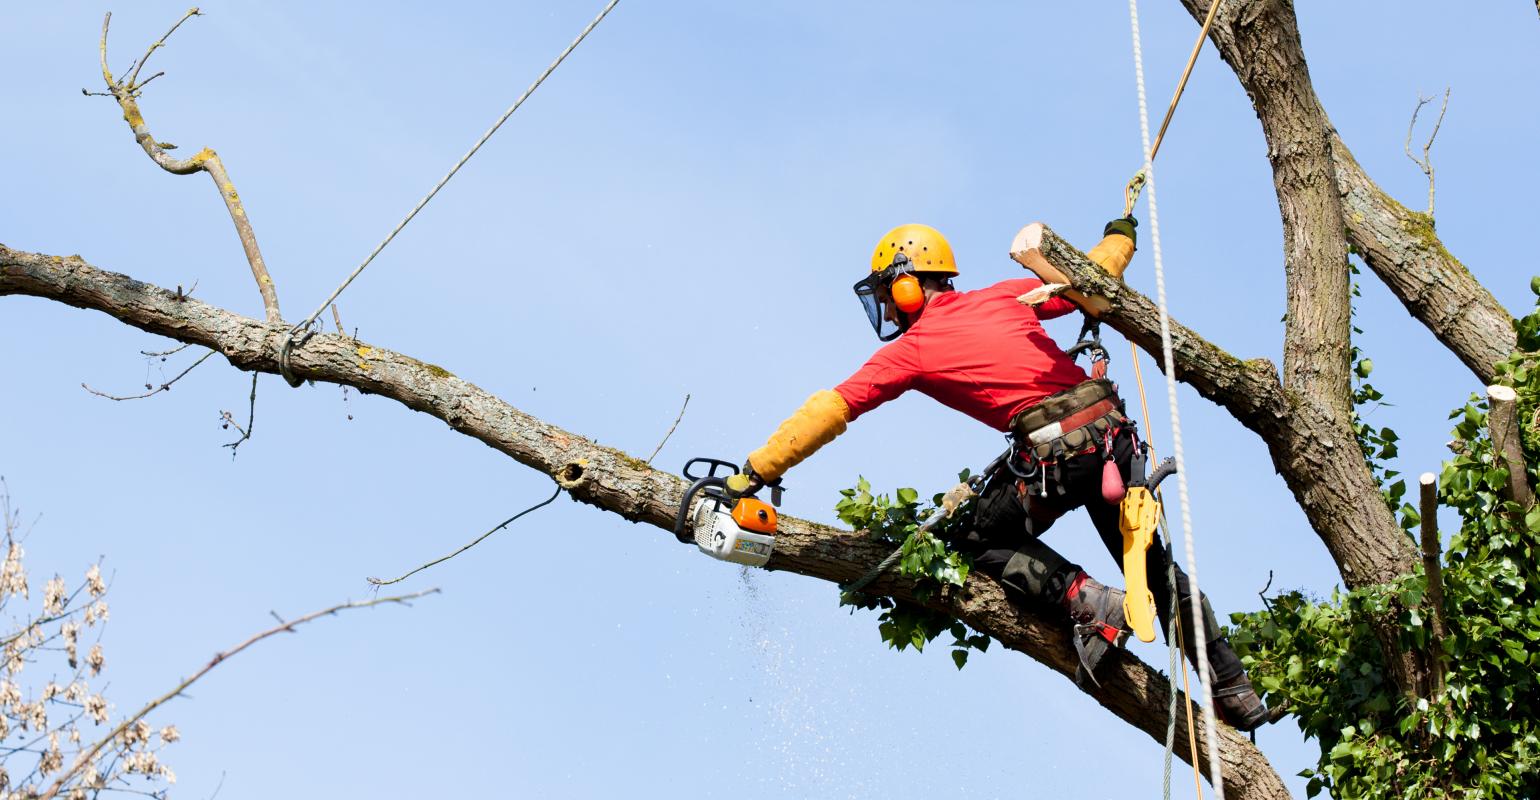 Tree Trimming Services-Palm Beach Island Tree Trimming and Tree Removal Services-We Offer Tree Trimming Services, Tree Removal, Tree Pruning, Tree Cutting, Residential and Commercial Tree Trimming Services, Storm Damage, Emergency Tree Removal, Land Clearing, Tree Companies, Tree Care Service, Stump Grinding, and we're the Best Tree Trimming Company Near You Guaranteed!